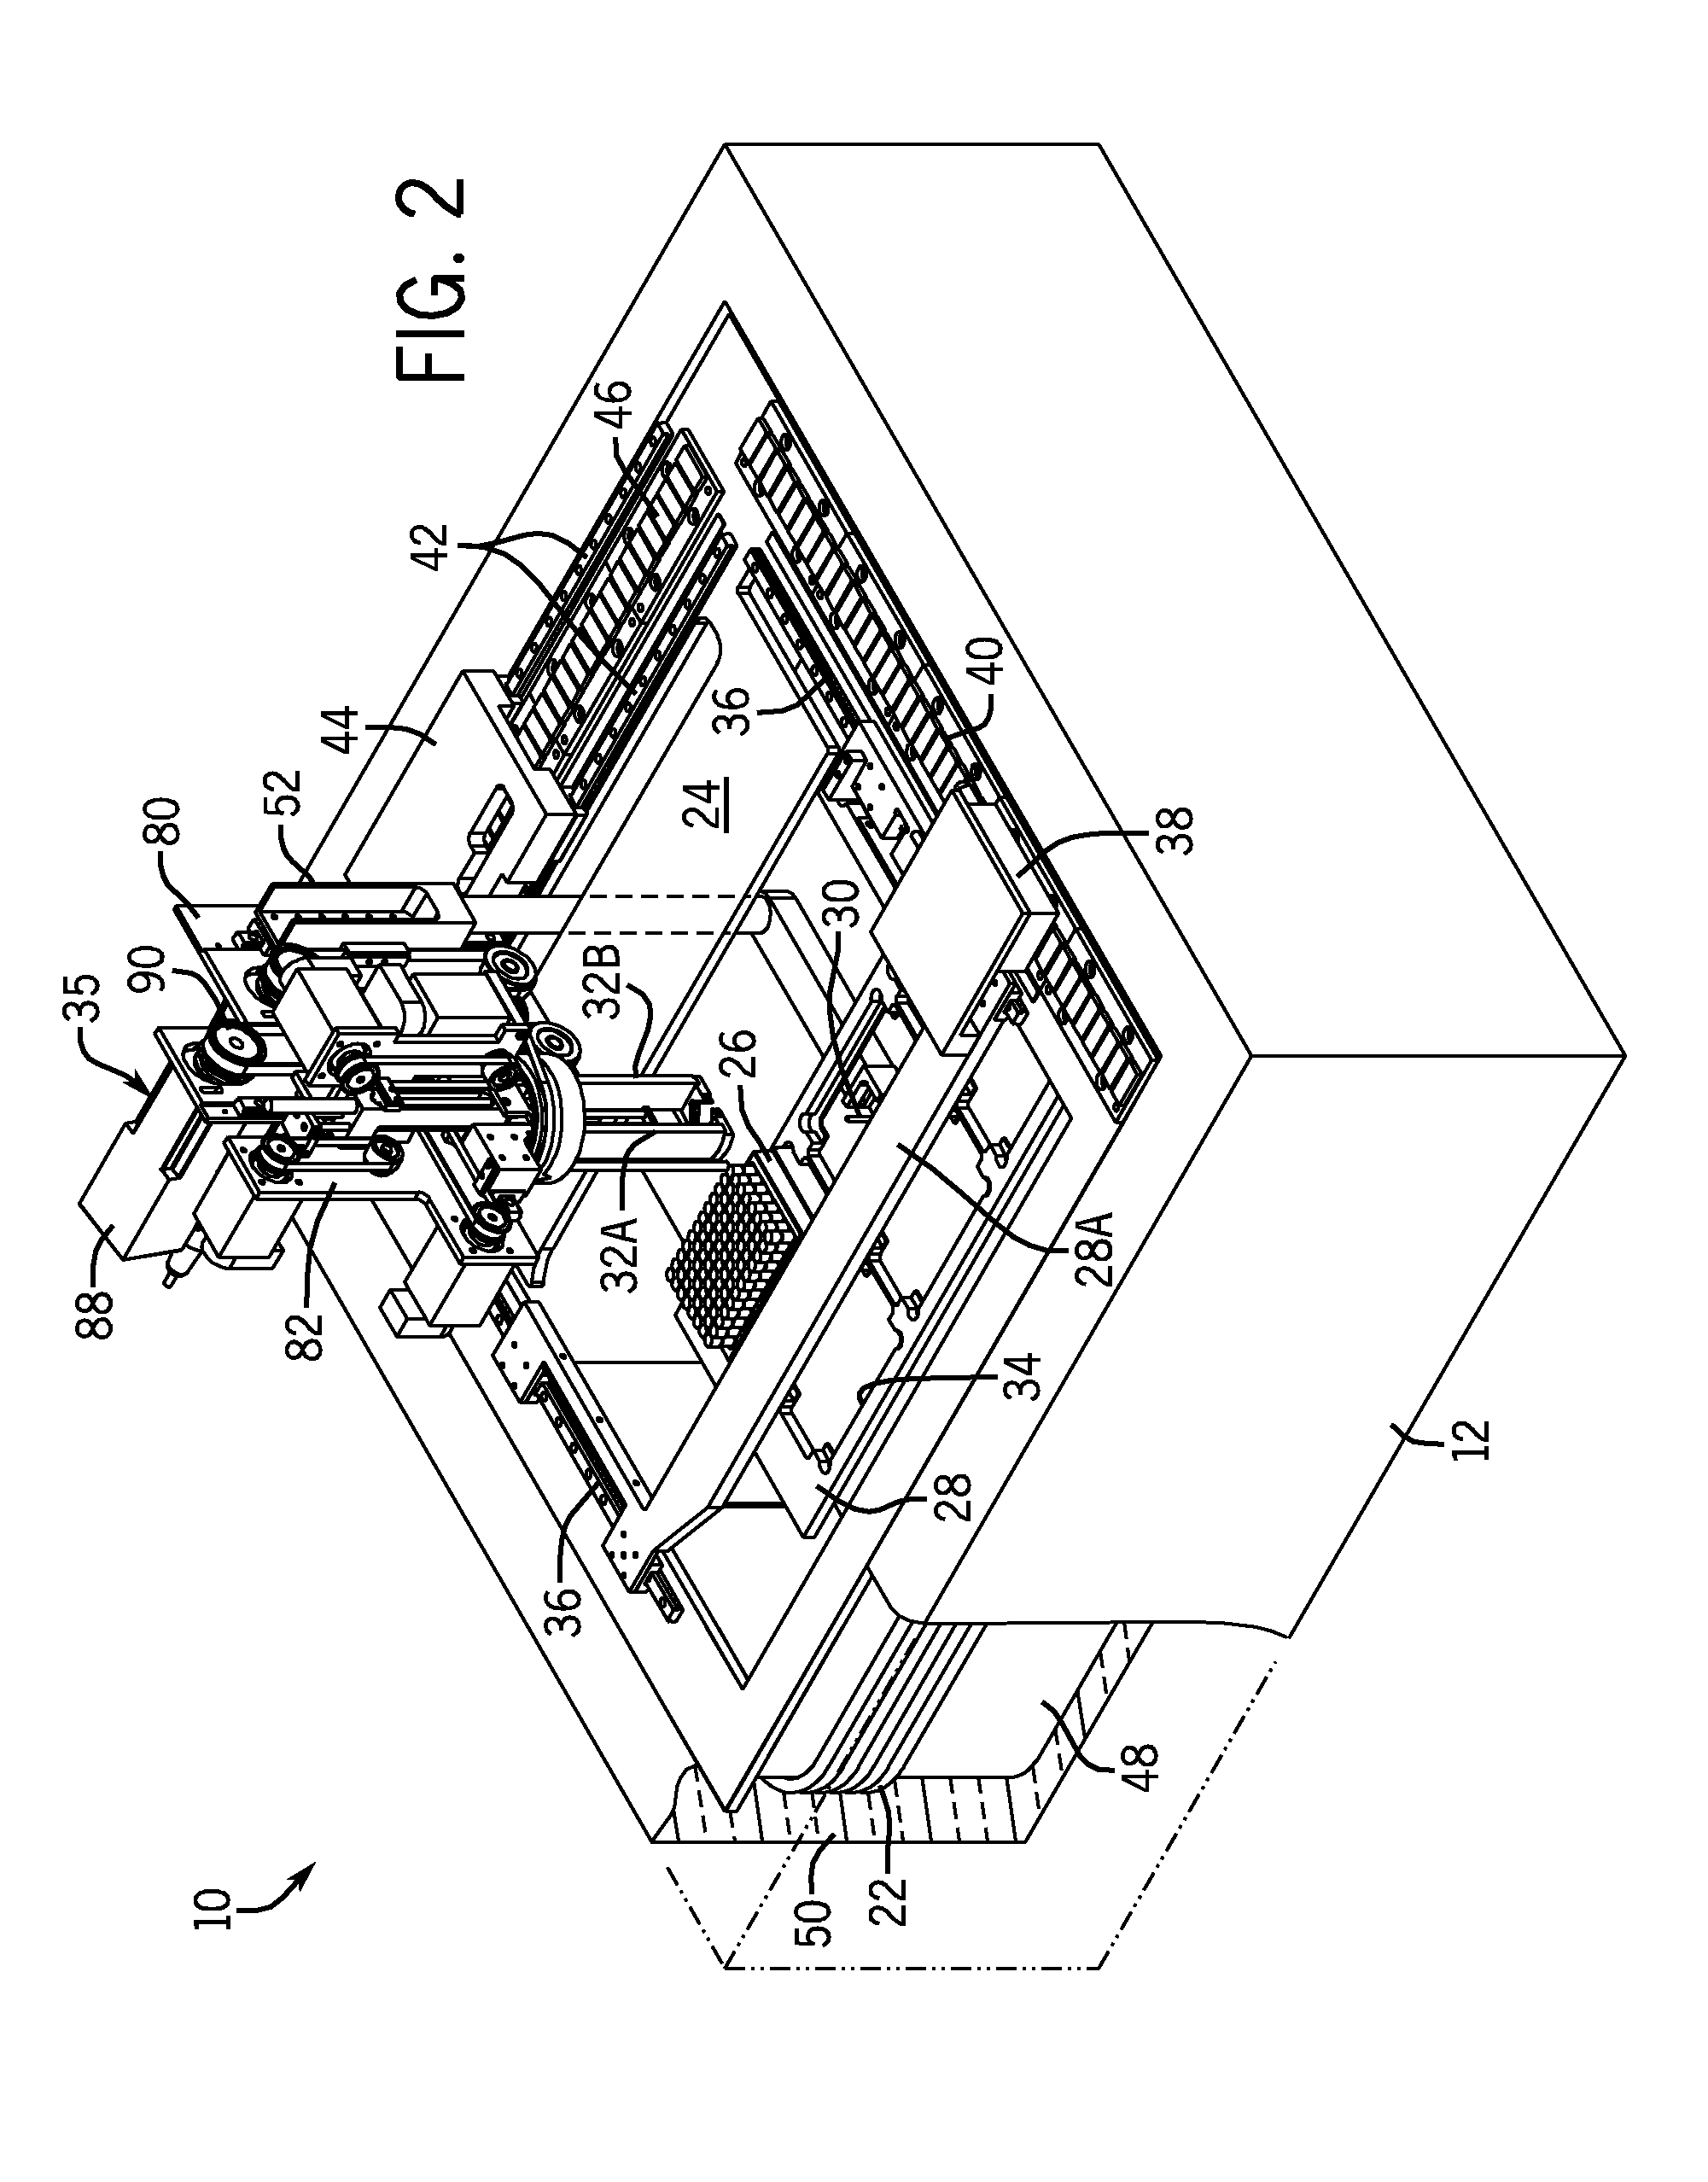 Tube Picking Mechanisms with an Ultra-Low Temperature or Cryogenic Picking Compartment